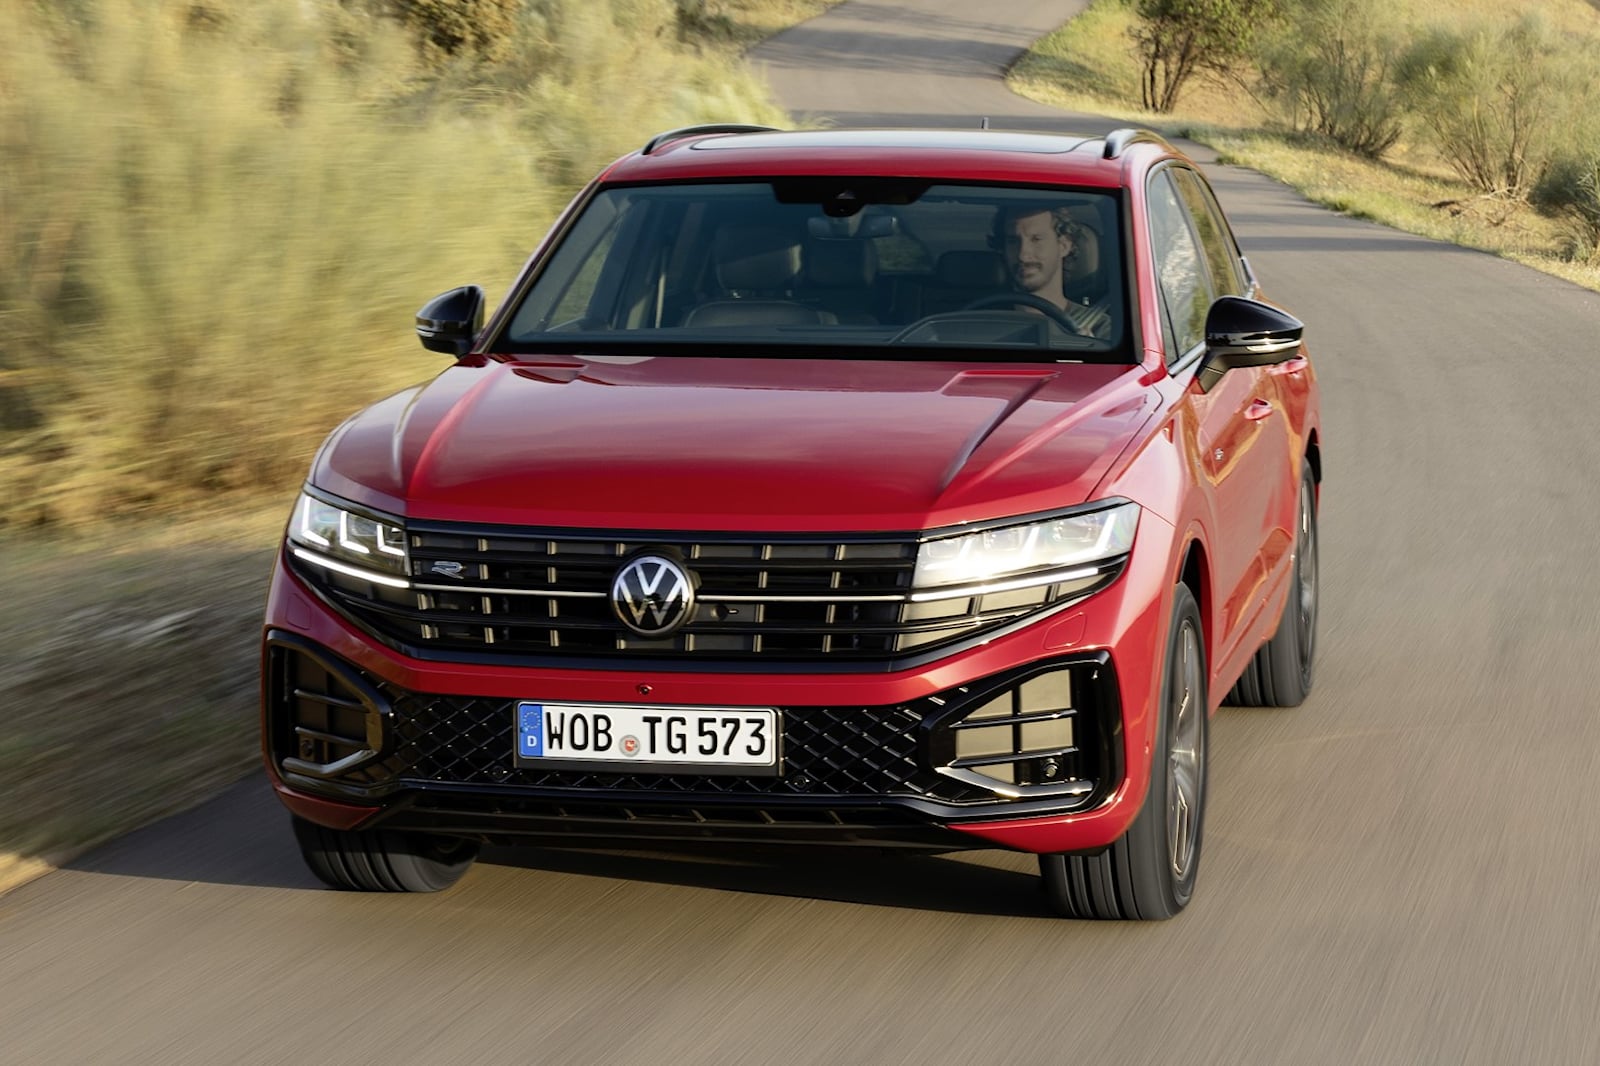 New Volkswagen Touareg Could Be The Nicest VW That America Can't